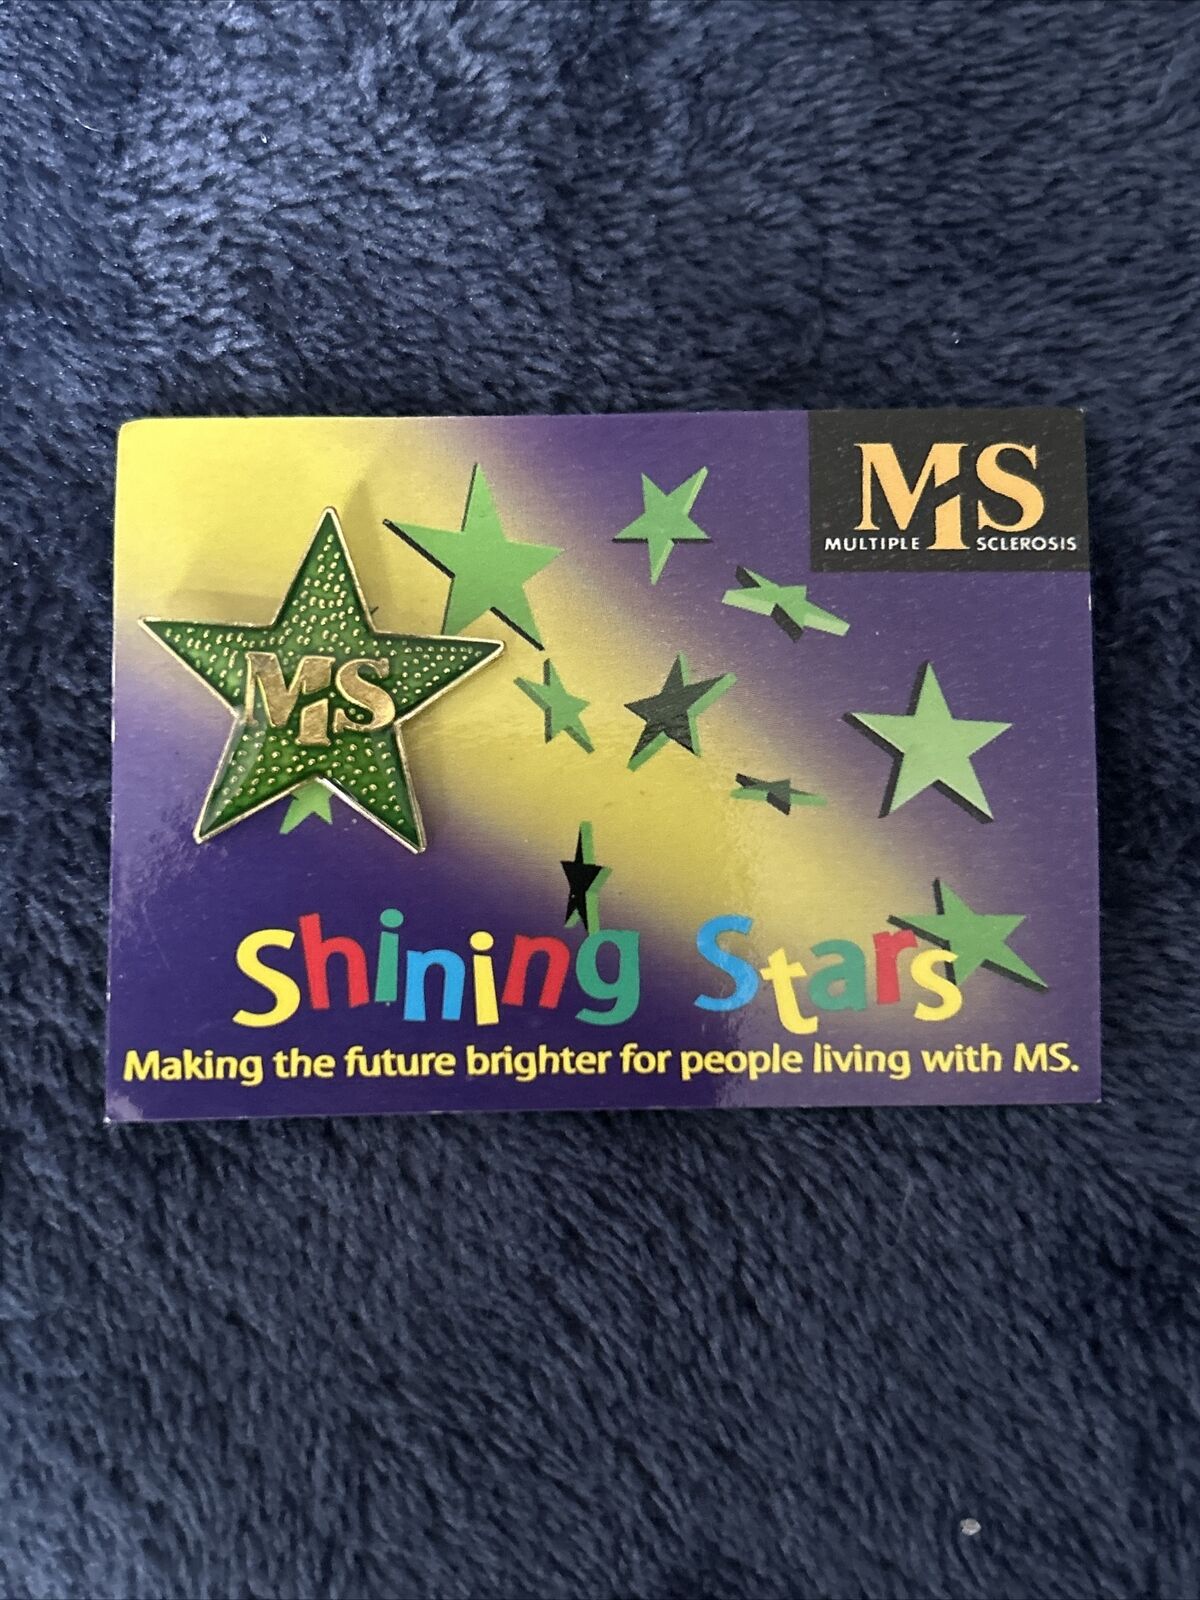 Multiple Sclerosis MS Charity Pin Badge Shining Stars Green